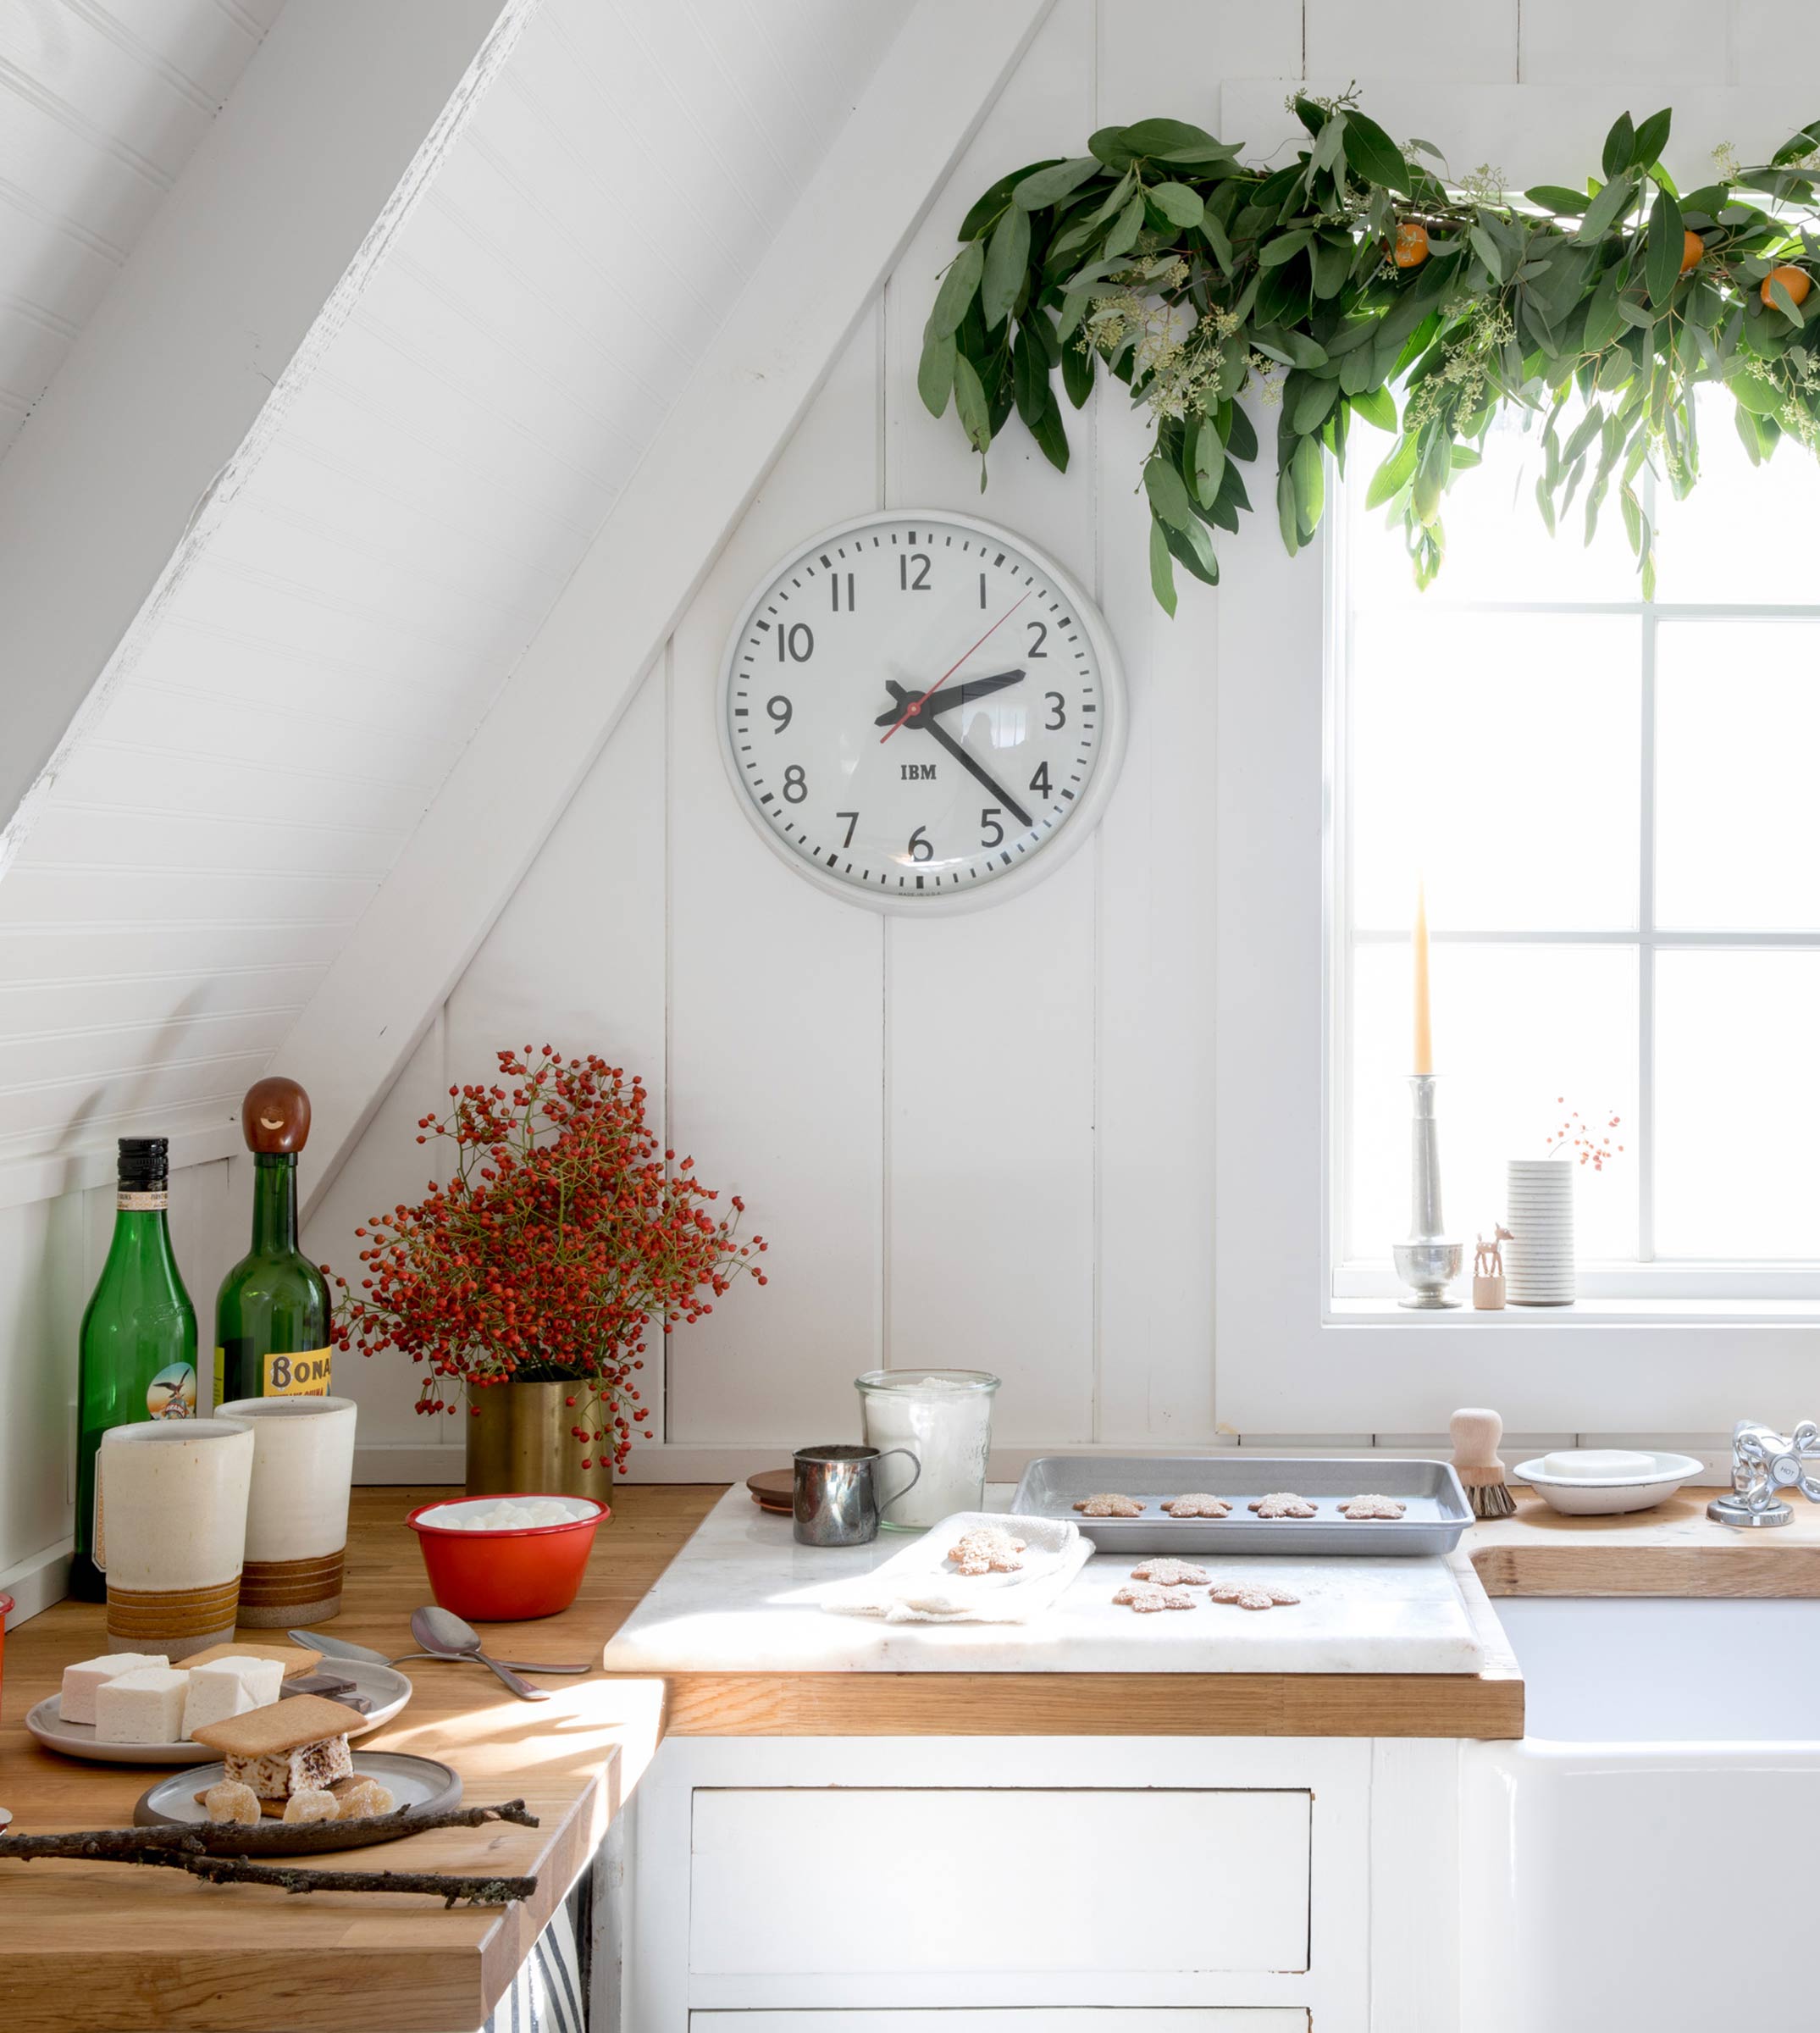 Vintage clock in a bright kitchen with a garland.